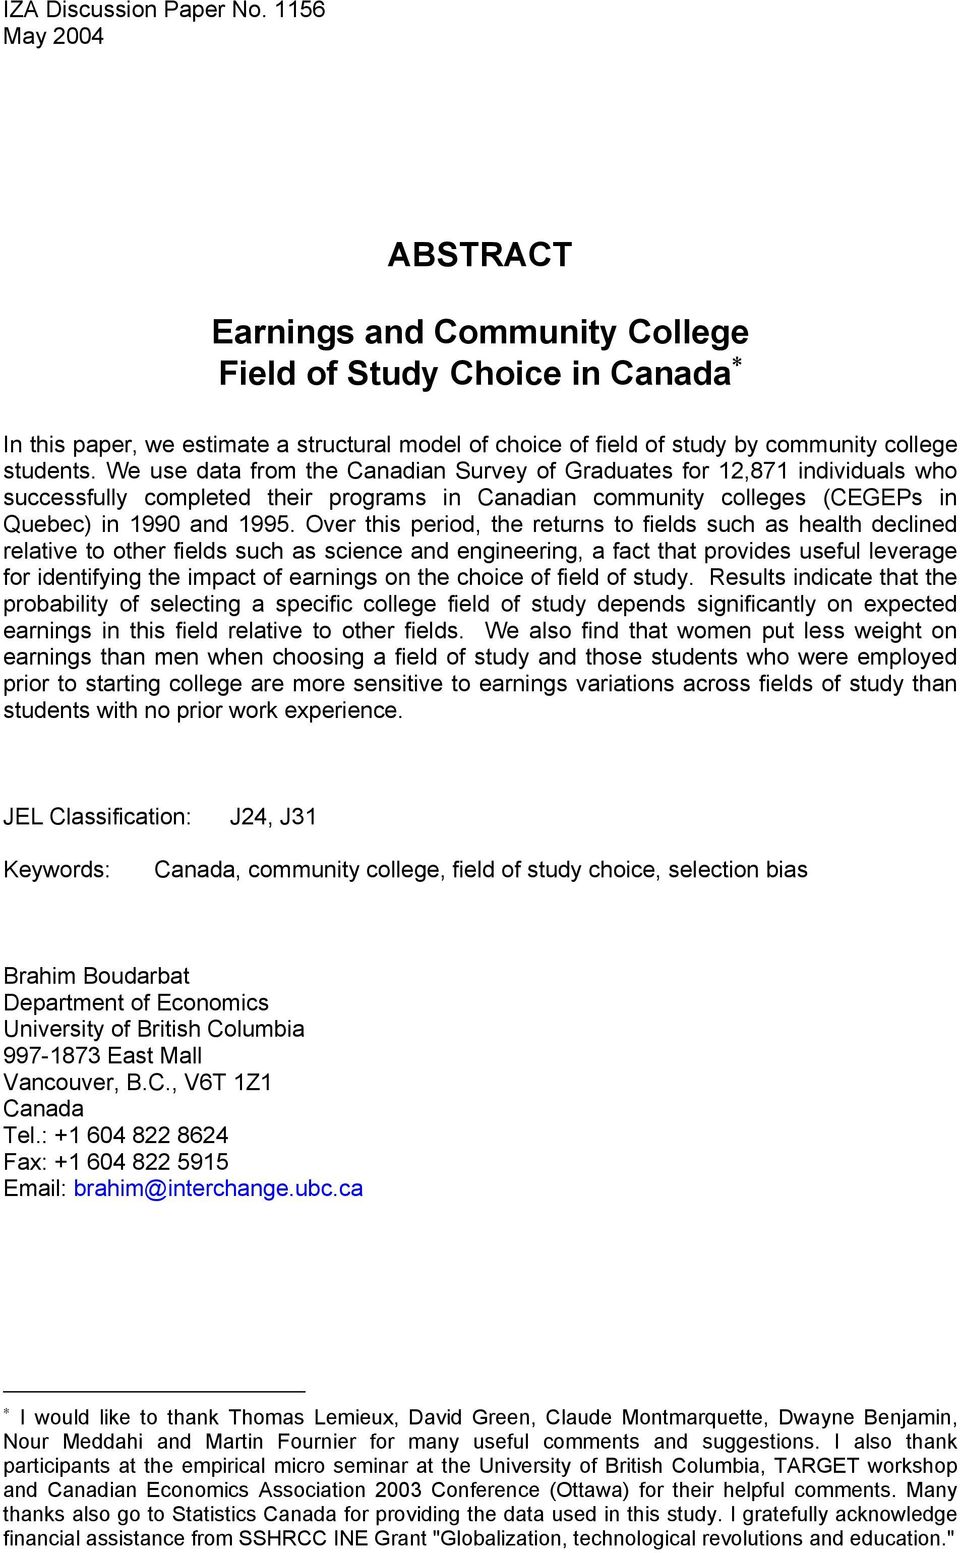 We use data fro the Canadian Survey of Graduates for 12,871 individuals who successfully copleted their progras in Canadian counity colleges (CEGEPs in Quebec) in 1990 and 1995.